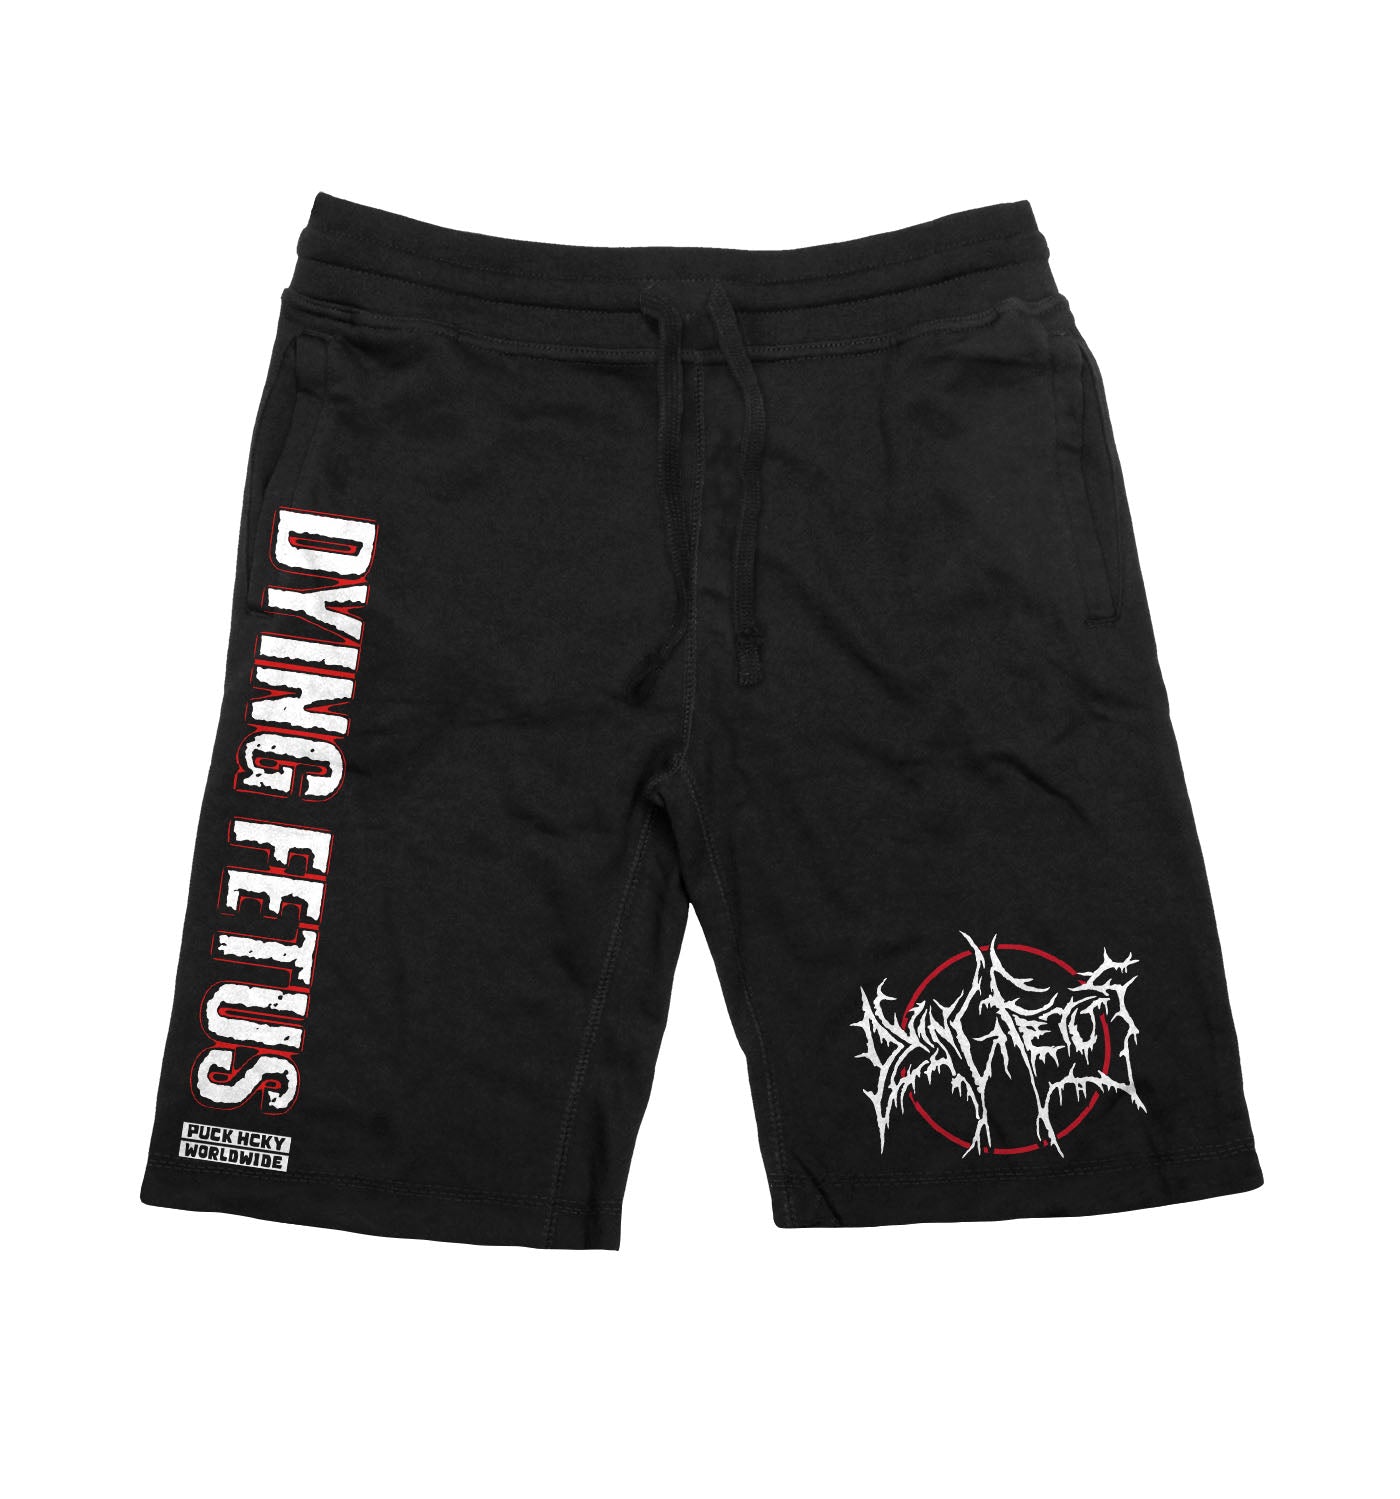 DYING FETUS 'DOUBLE LOGO' fleece hockey shorts in black front view